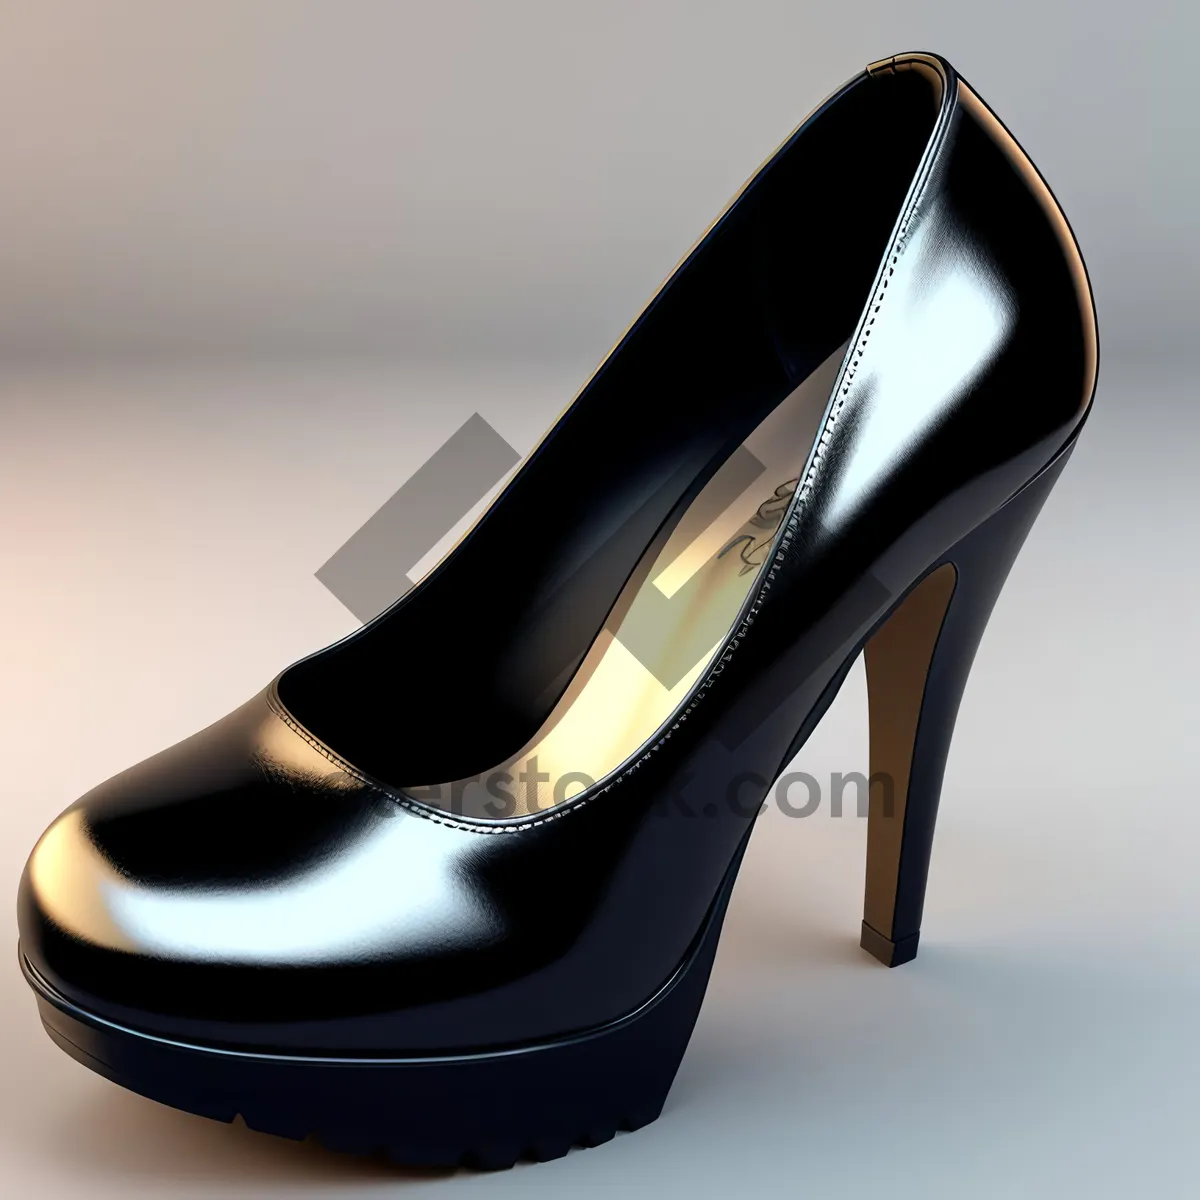 Picture of Classic black leather men's shoes with shiny heels